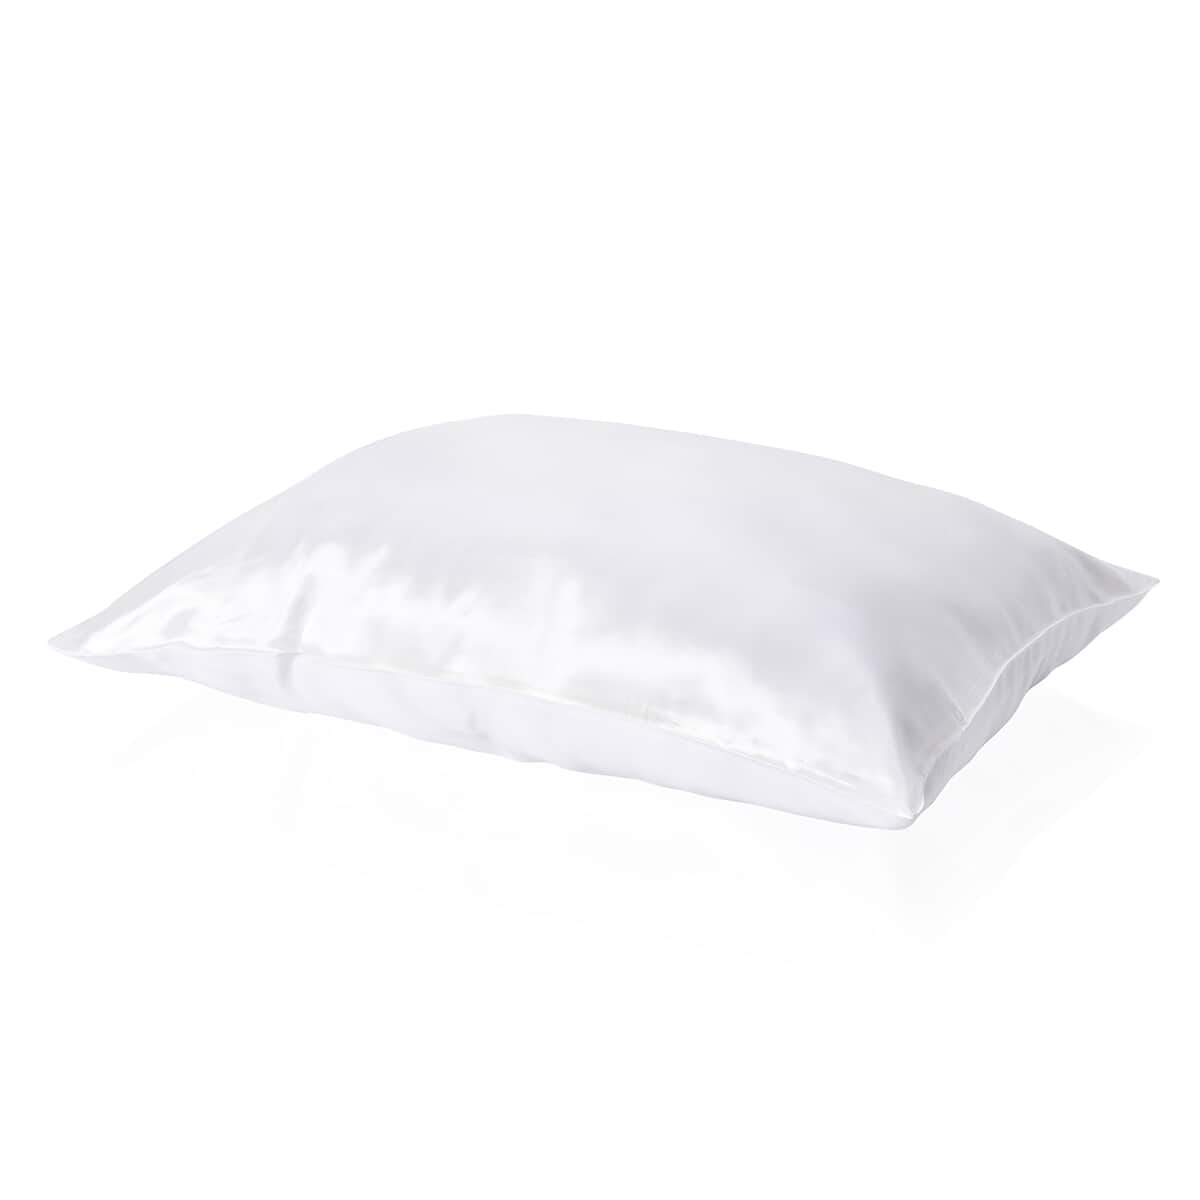 Symphony Home Ivory 100% Mulberry Silk Pillowcase Infused with Hyaluronic Acid & Argan Oil -Full (20x26) image number 0